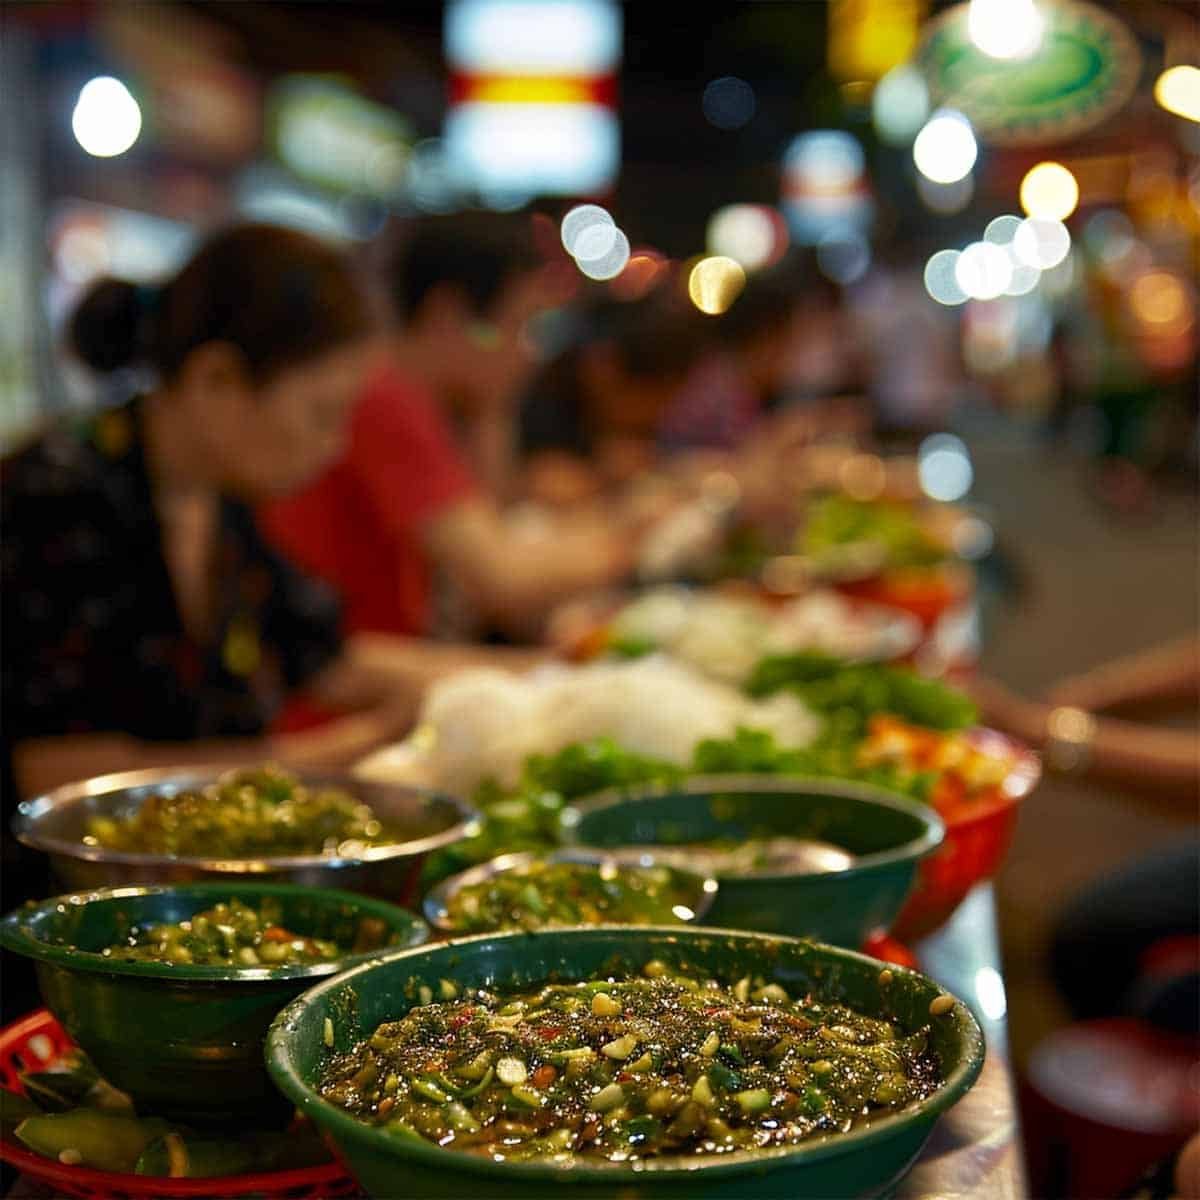 Bowls of Thai chili dipping sauce at a Thai night market. In the out-of-focus background, people eat at tables.